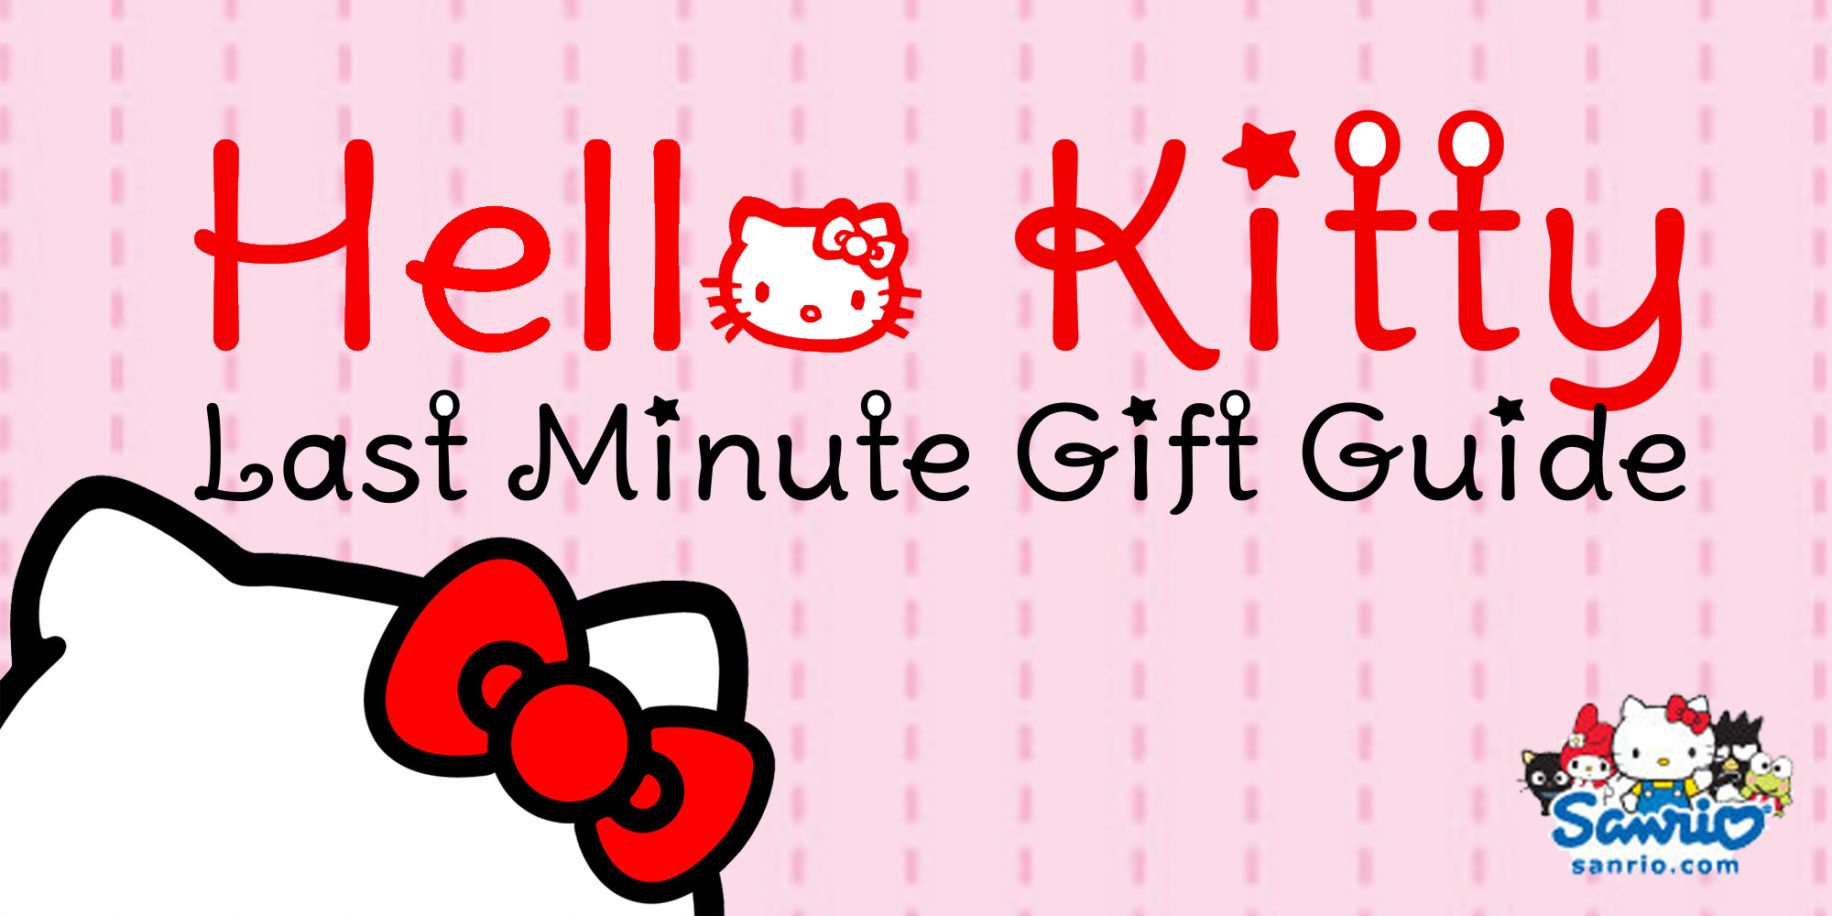 Hello Kitty is ready with holiday gift suggestions  Image: Dakster Sullivan